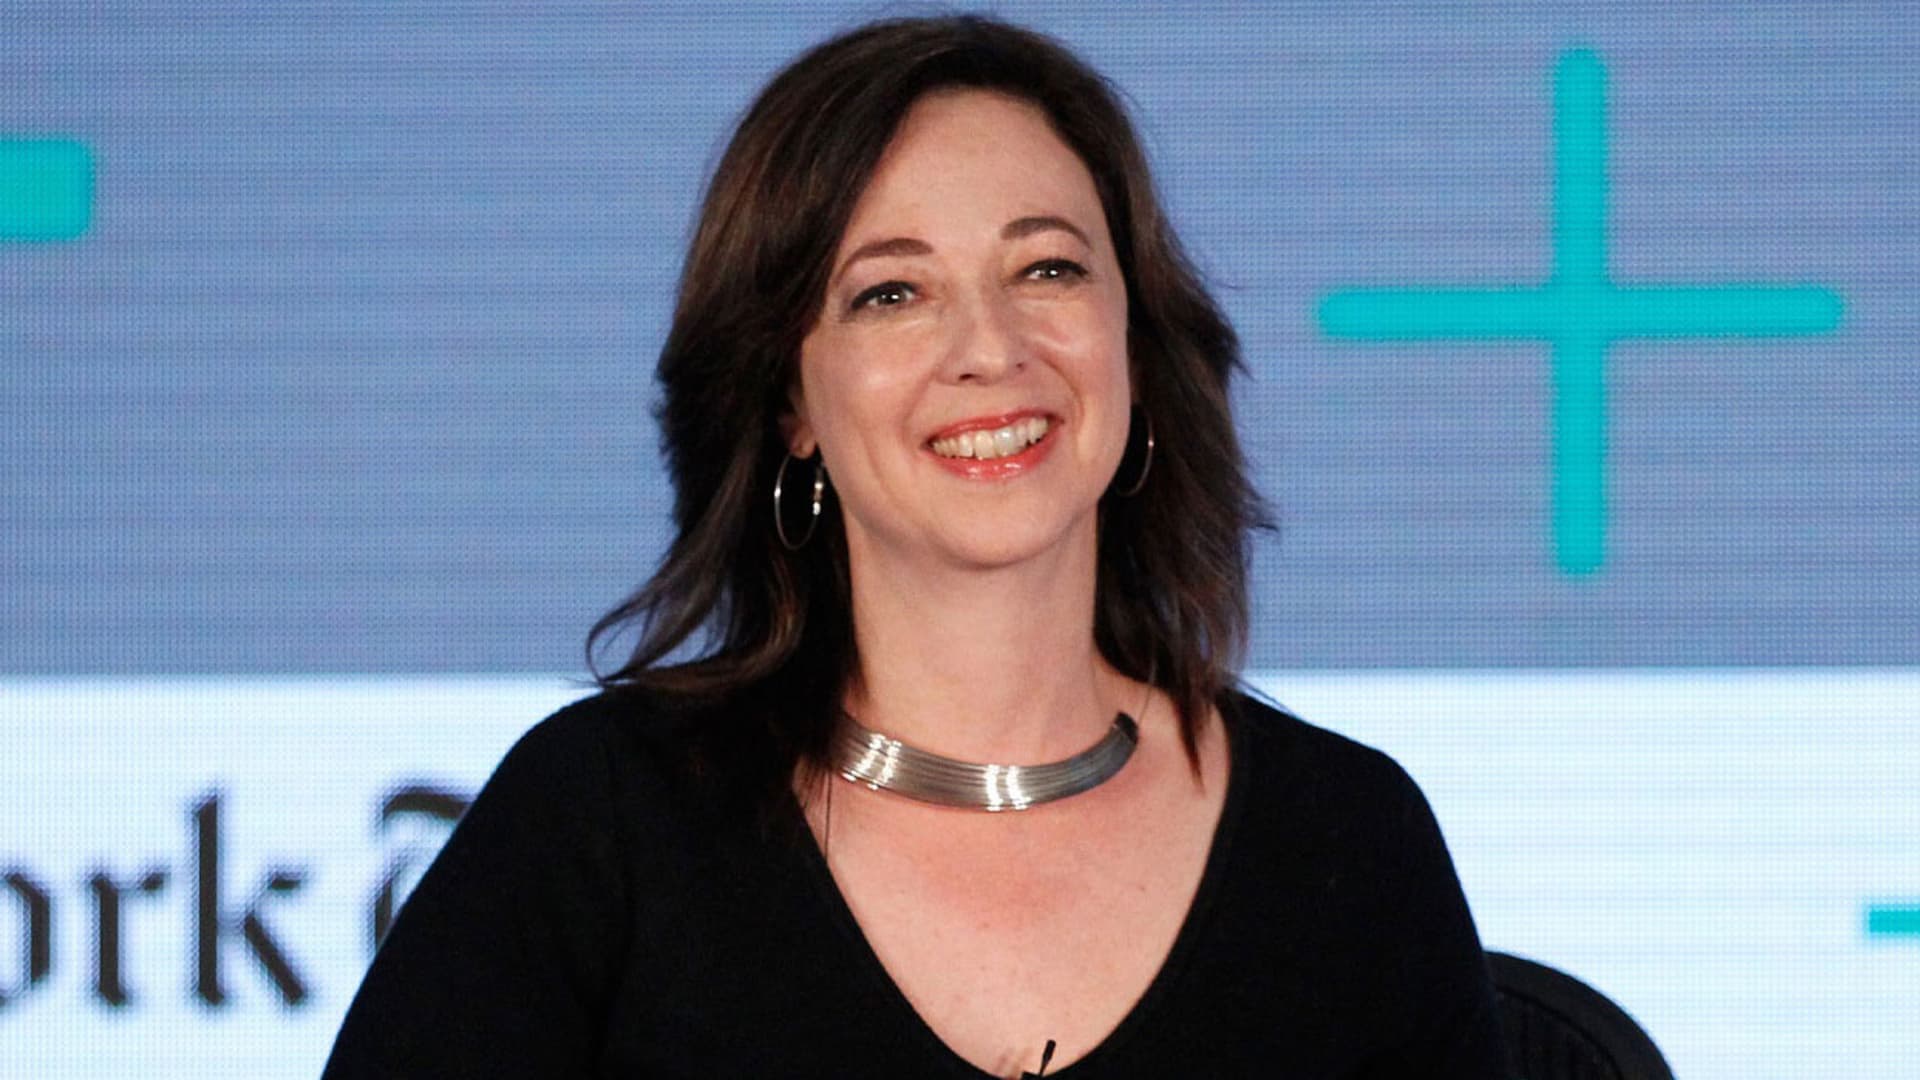 Introverts are 'routinely passed up' for promotions—but have 3 traits that can make great leaders, says best-selling author Susan Cain